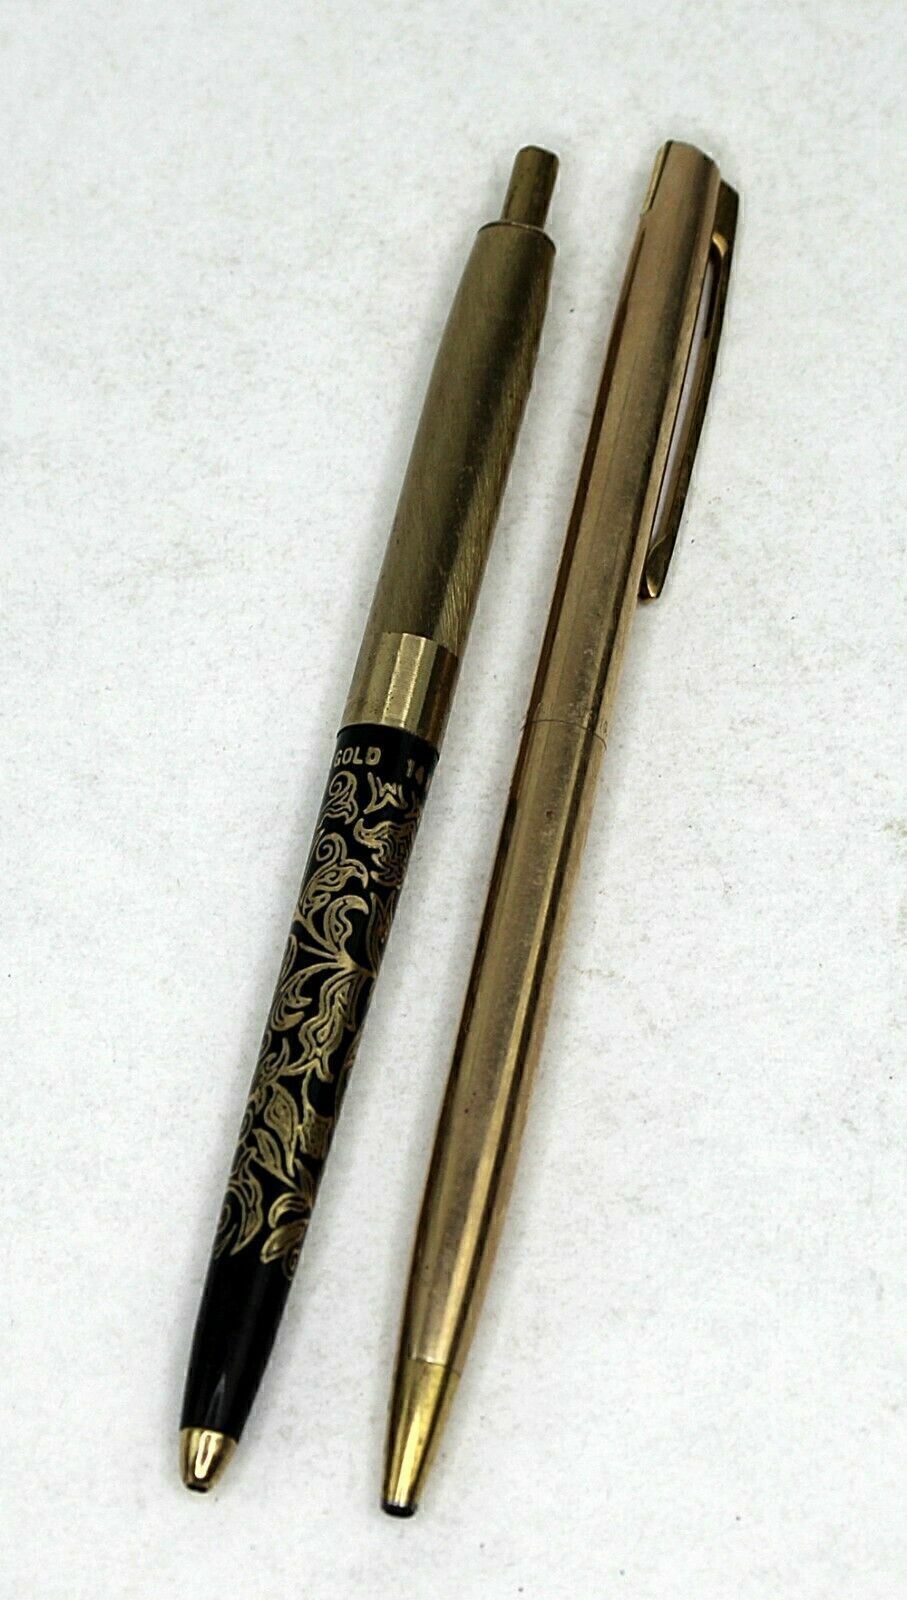 Pair of Specialty Pens 14K Gold inlay & 1/20 14K GF Casing Made in USA